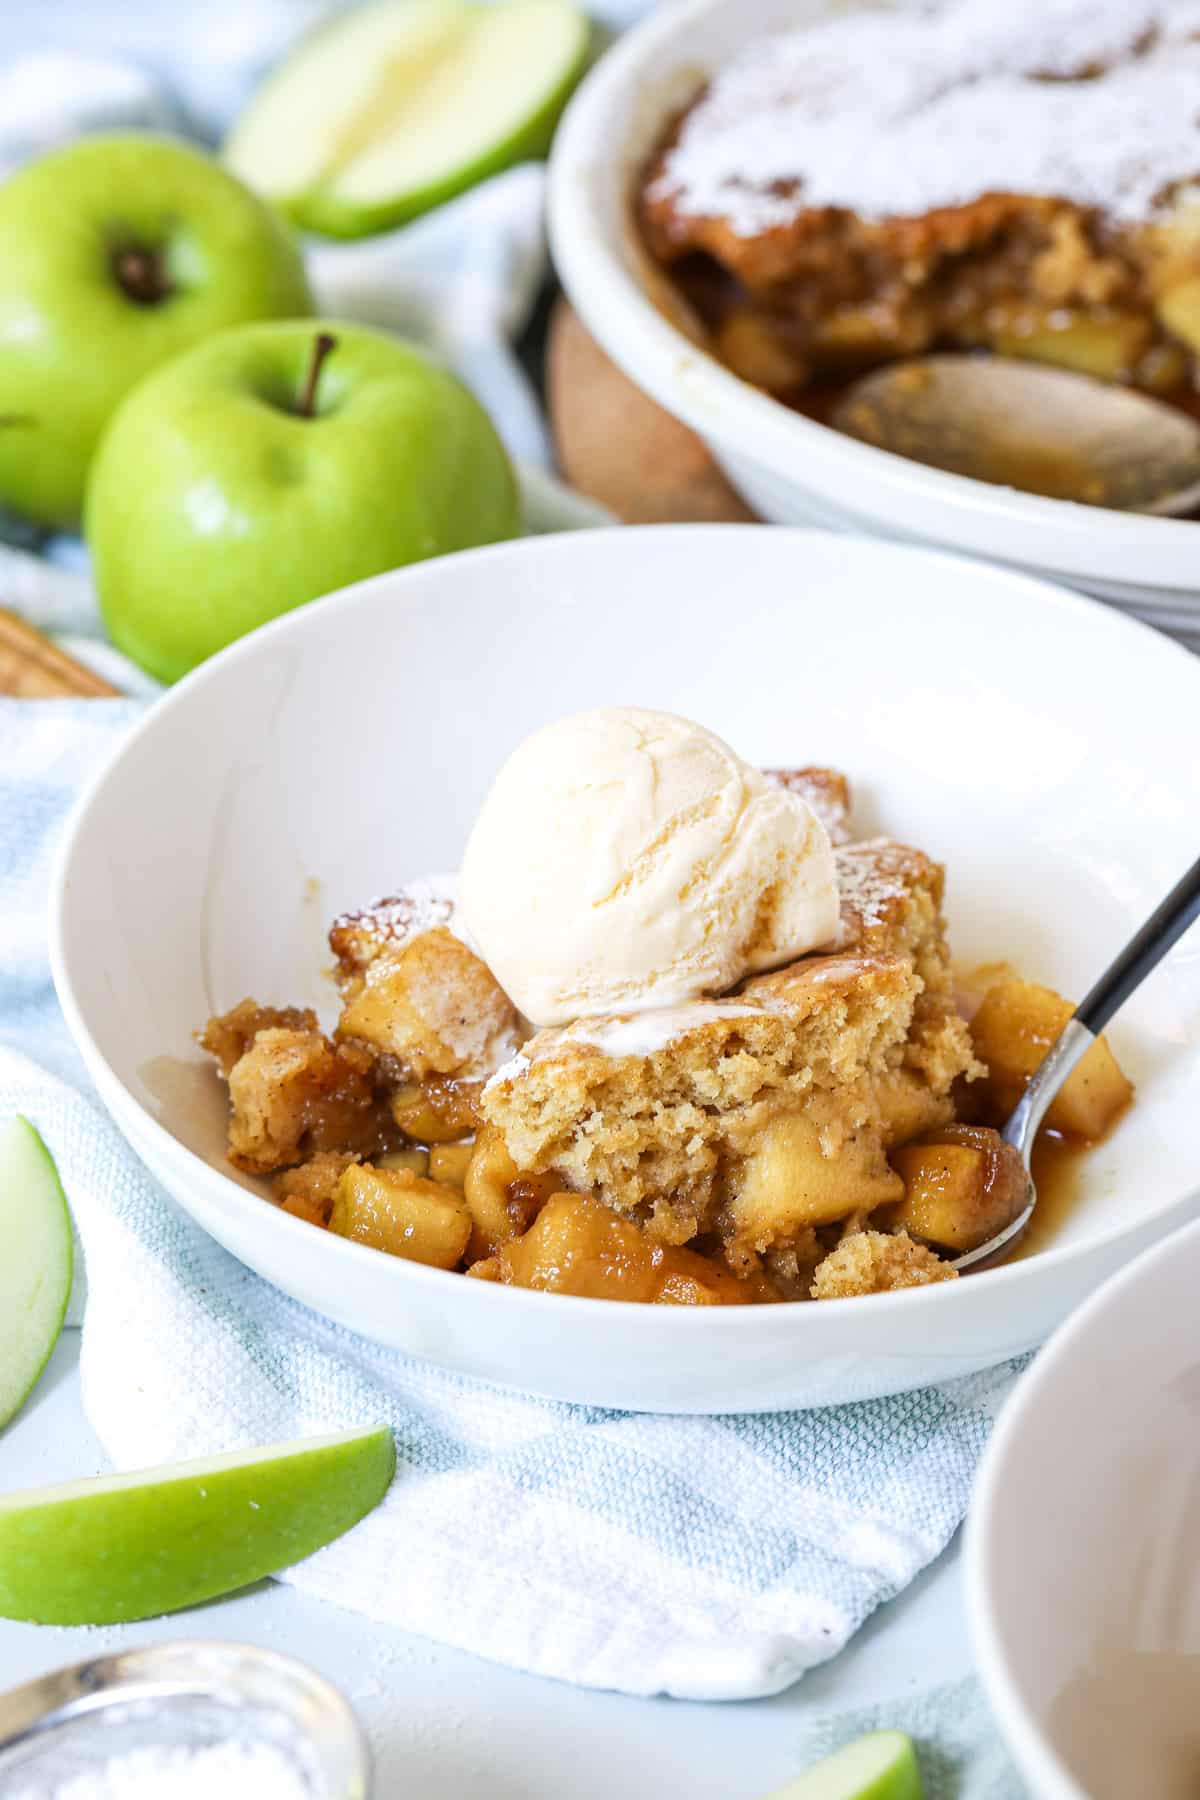 apple sponge pudding in a white bowl with a scoop of ice cream